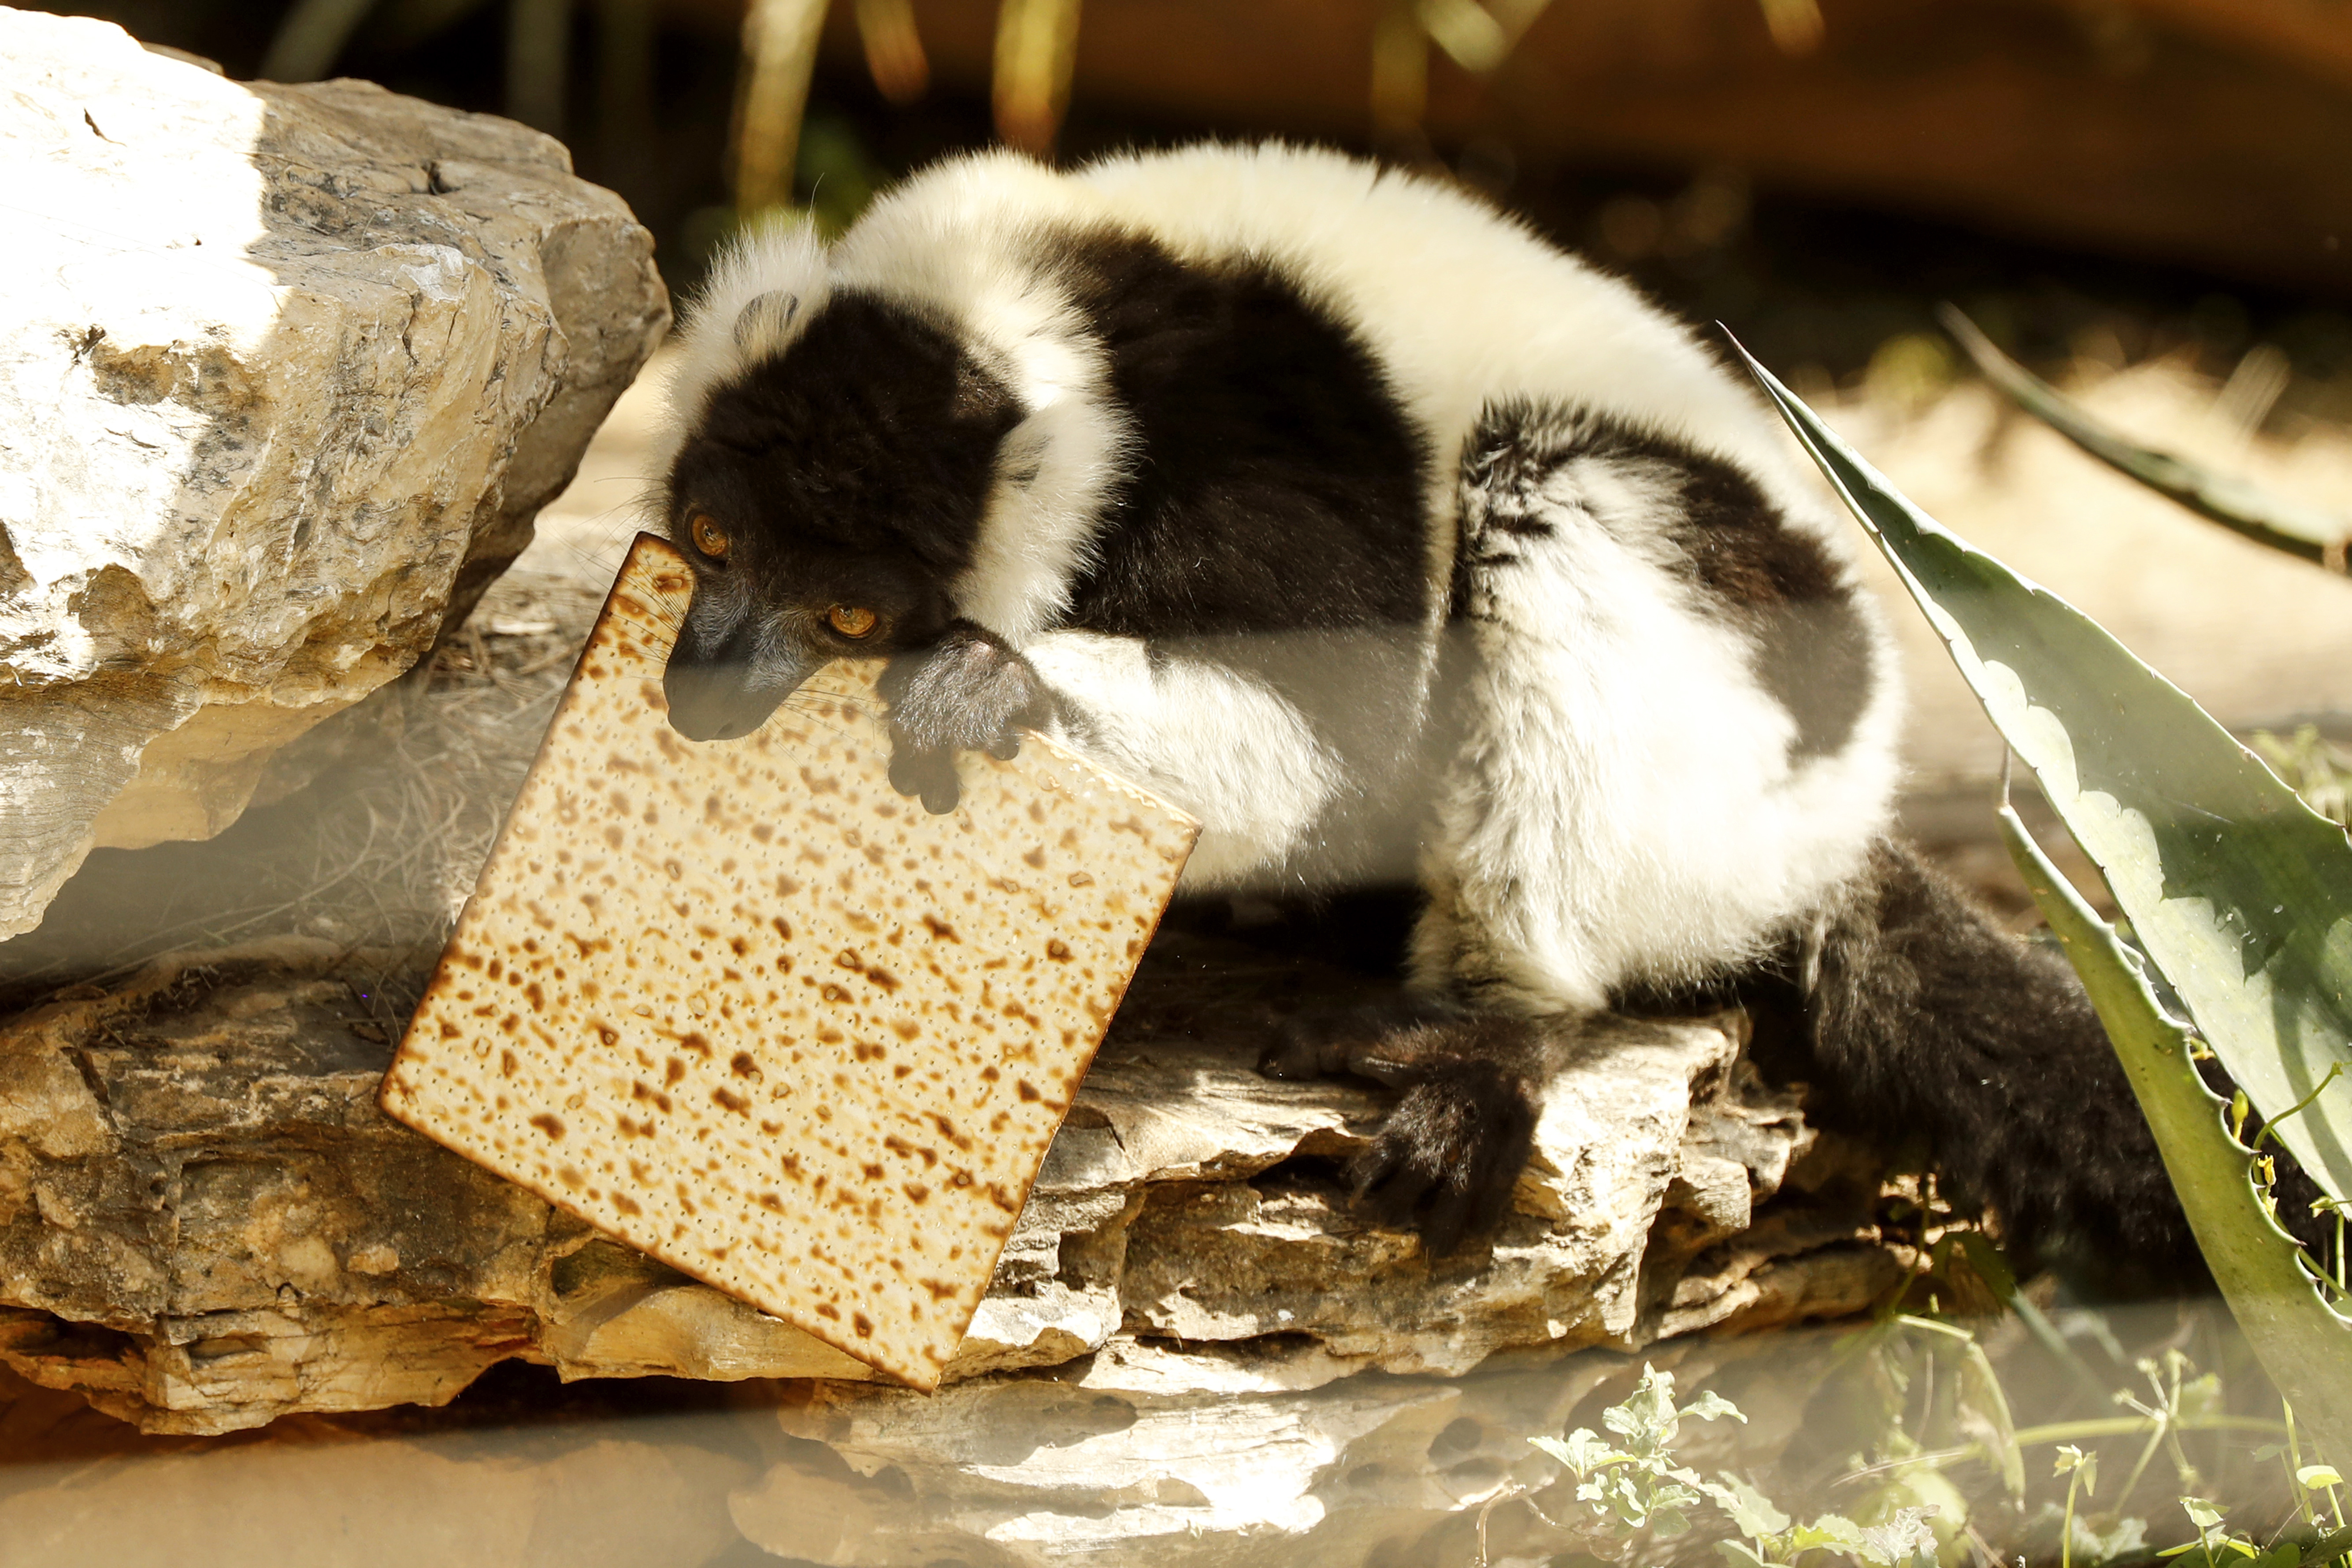 A lemur eats the traditional Matza (unleavened bread) in preparation for the upcoming Jewish holiday of Passover, at the Ramat Gan Safari Park near Tel Aviv (Jack Guez/AFP)